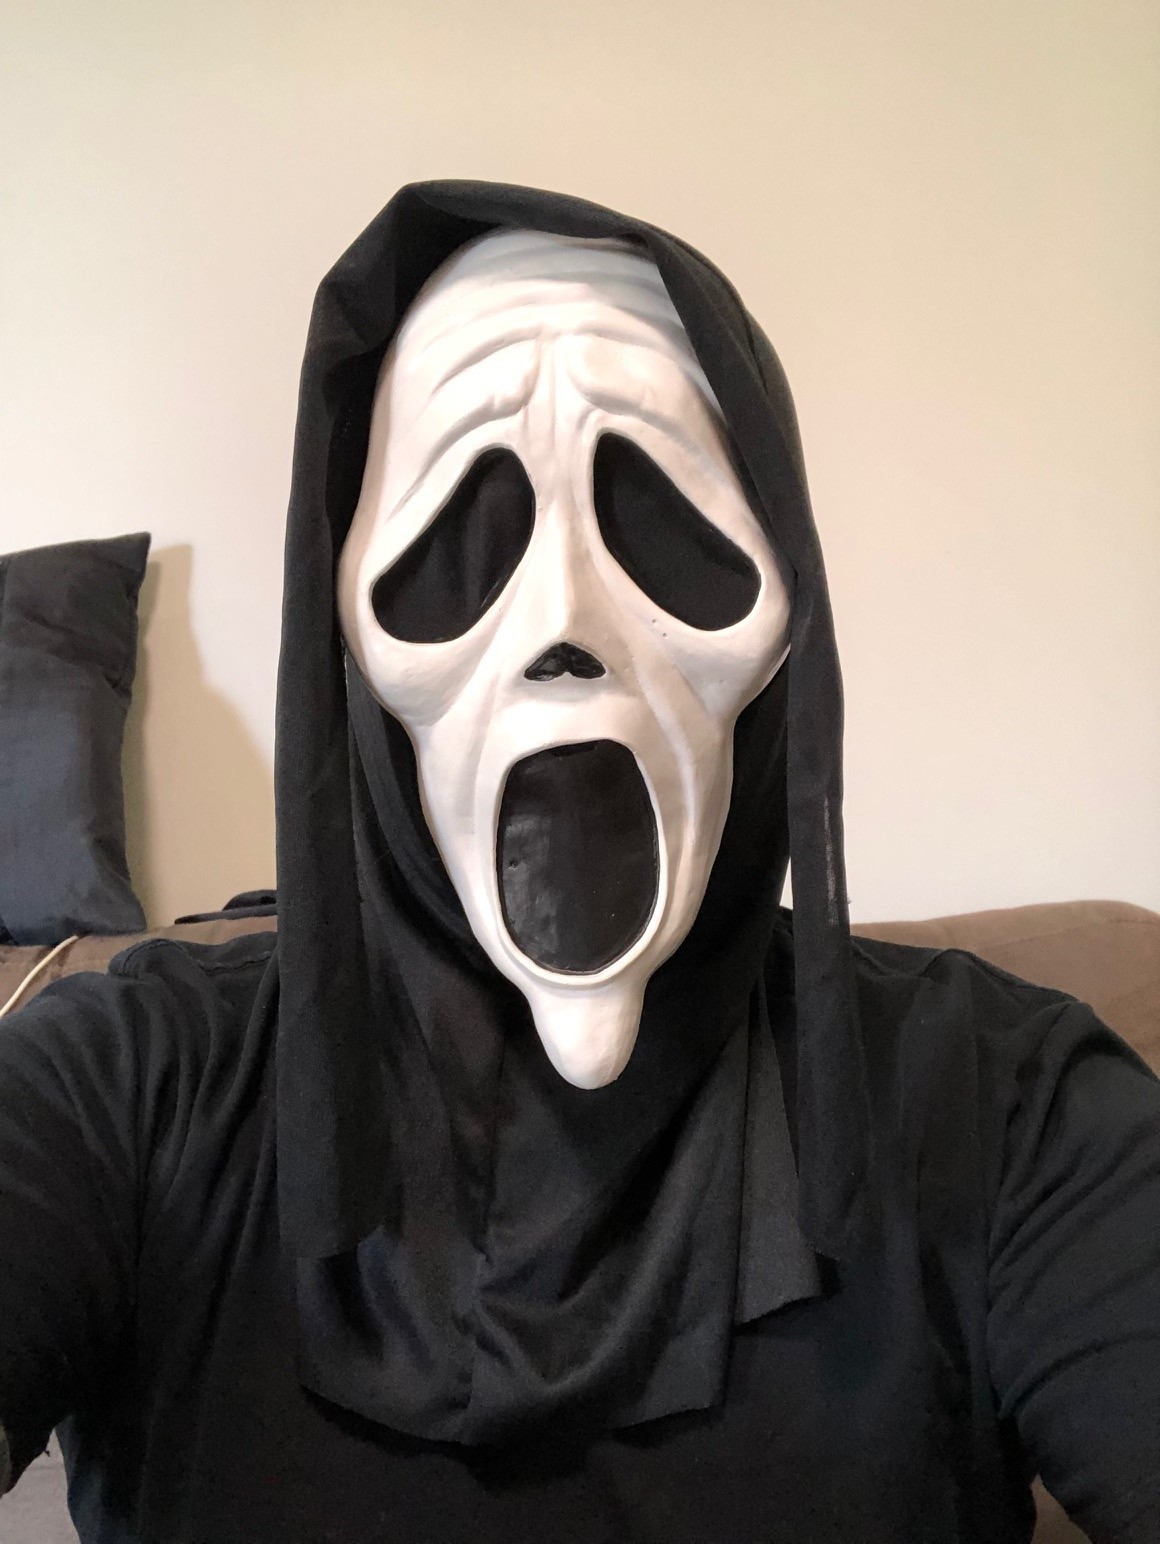 Scary Movie "The Killer" mask project | RPF Costume and Prop Maker Community